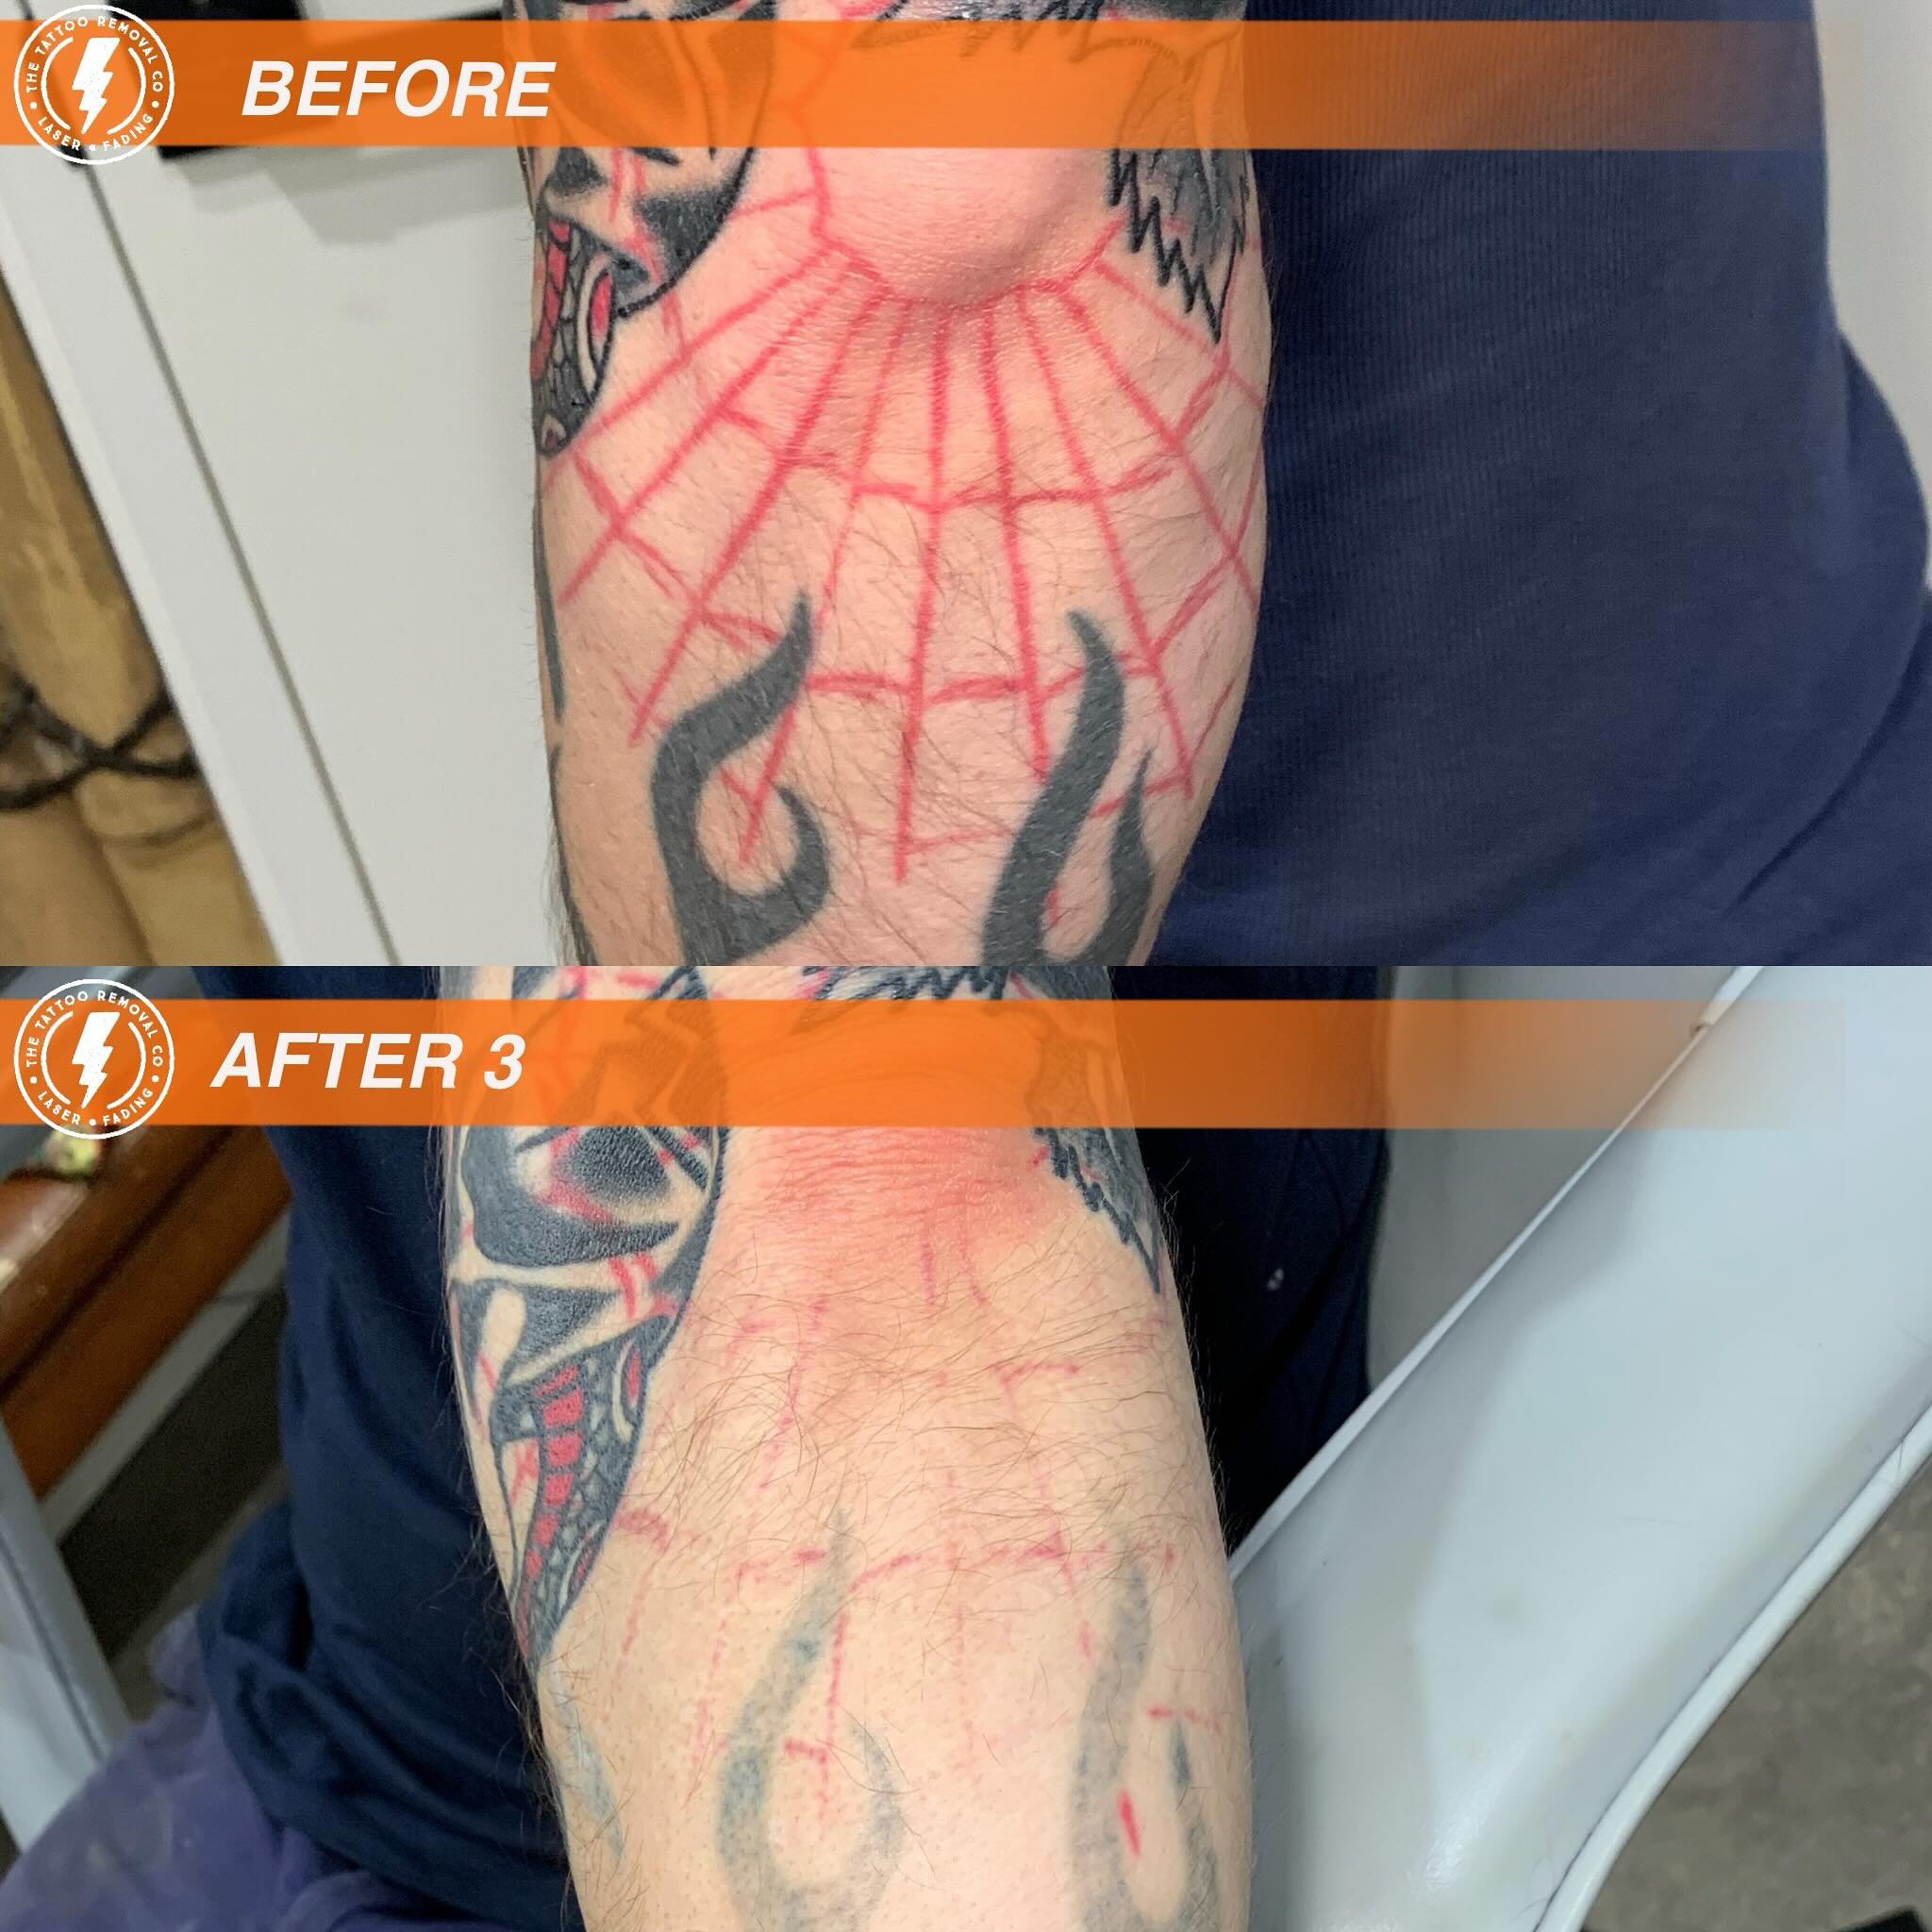 BEFORE/AFTER 3 TREATMENTS💥

We have been lucky enough to pull the red quicker then black. 

⚡️Fabulous result so far. These are the results you get with our experienced and knowledgeable Laser Technician @philly_ttrc_pagdin ⚡️

Consultations are FRE